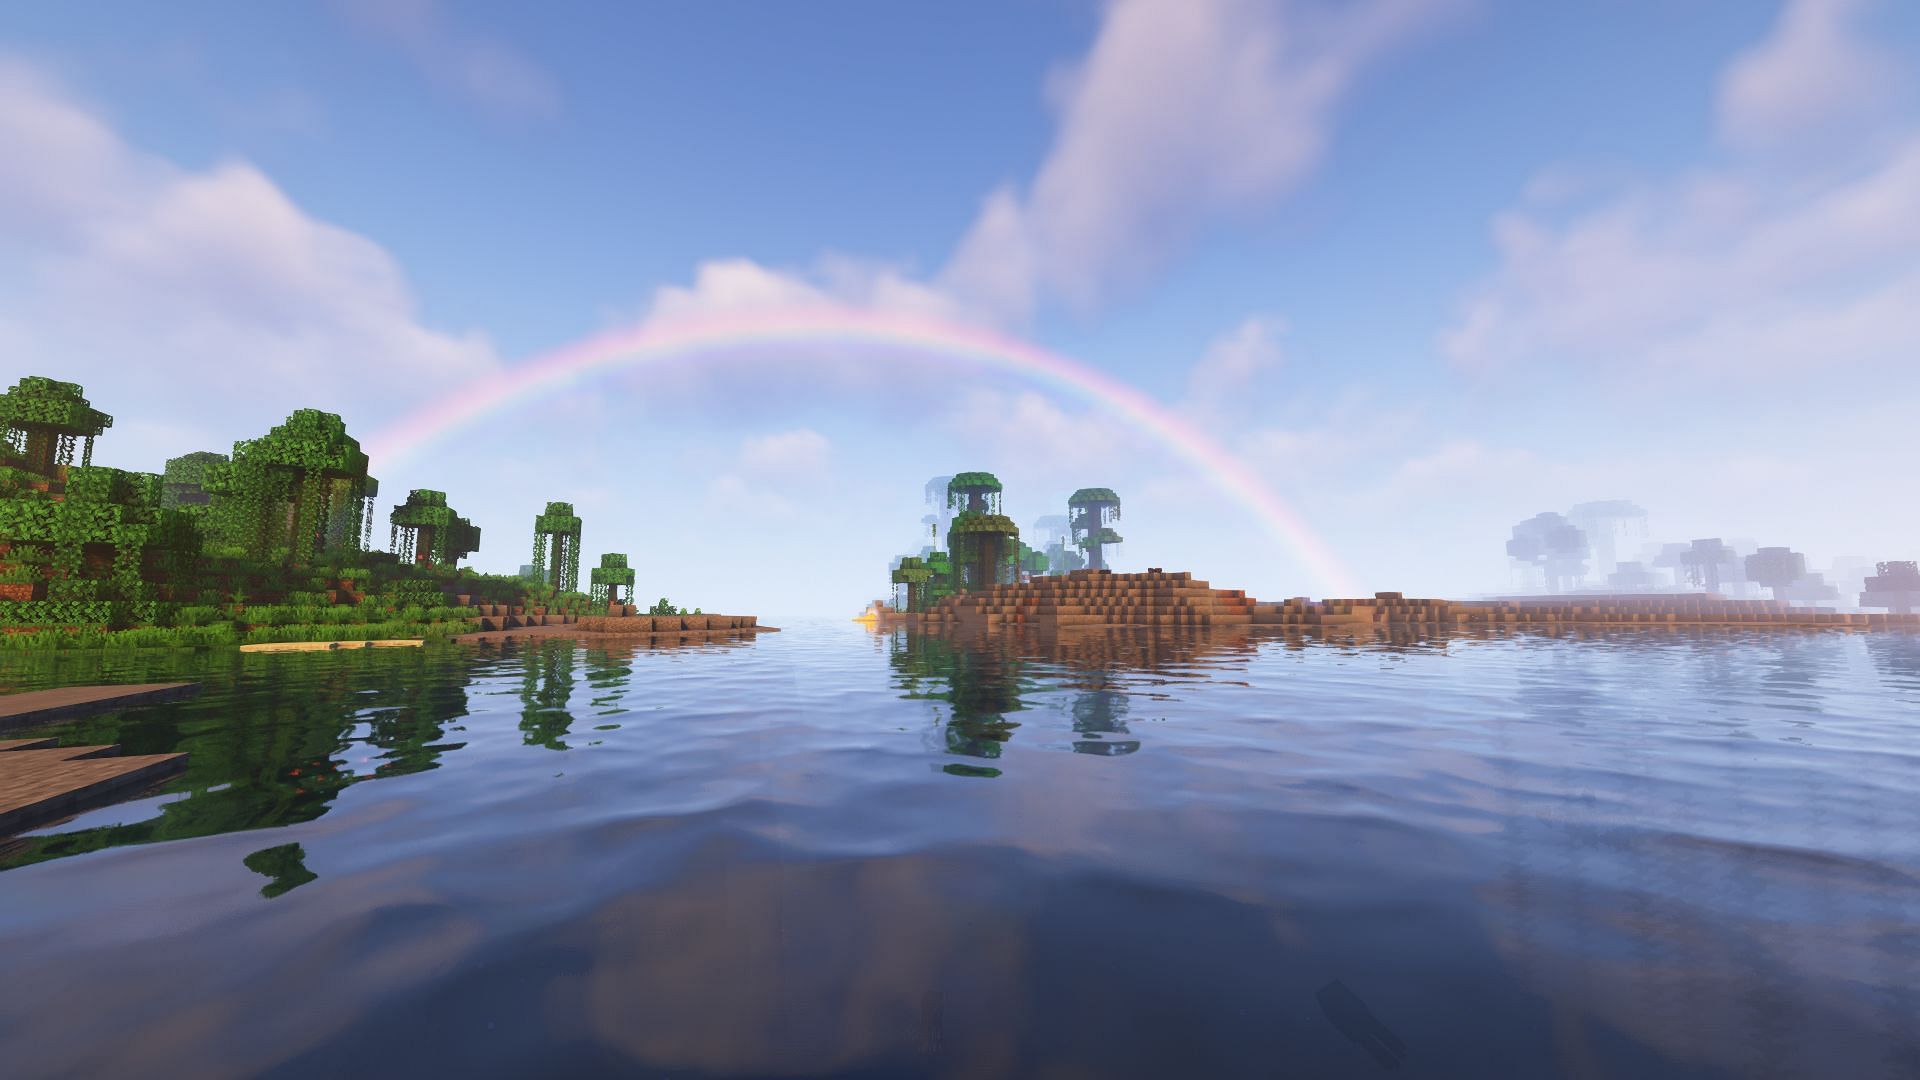 Some of the biomes in Minecraft need a overhaul (Image via Mojang)